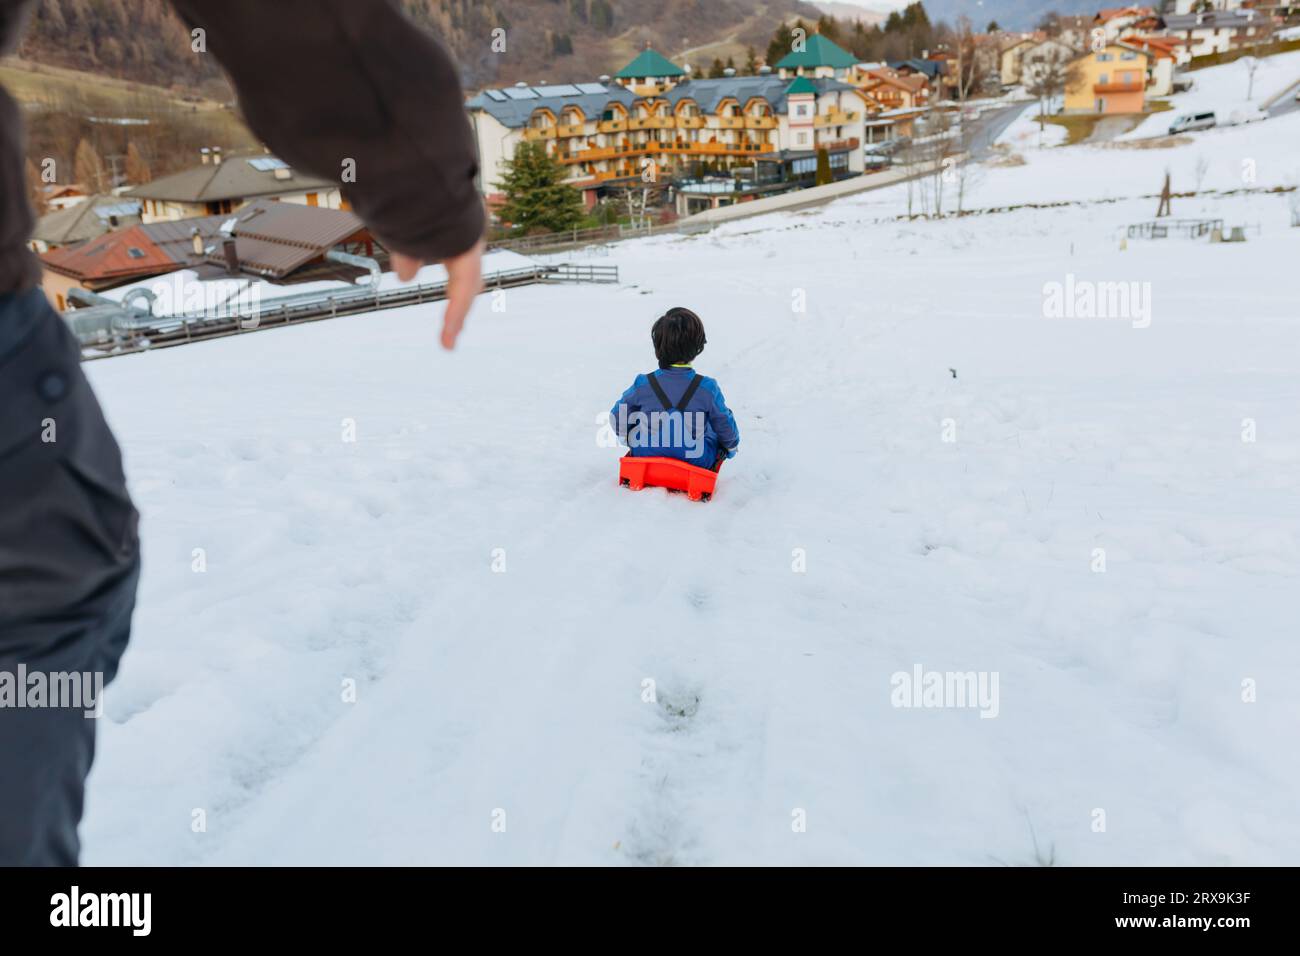 wide angle view of parent helping child with short dark hair to slide down the snowy hill Stock Photo